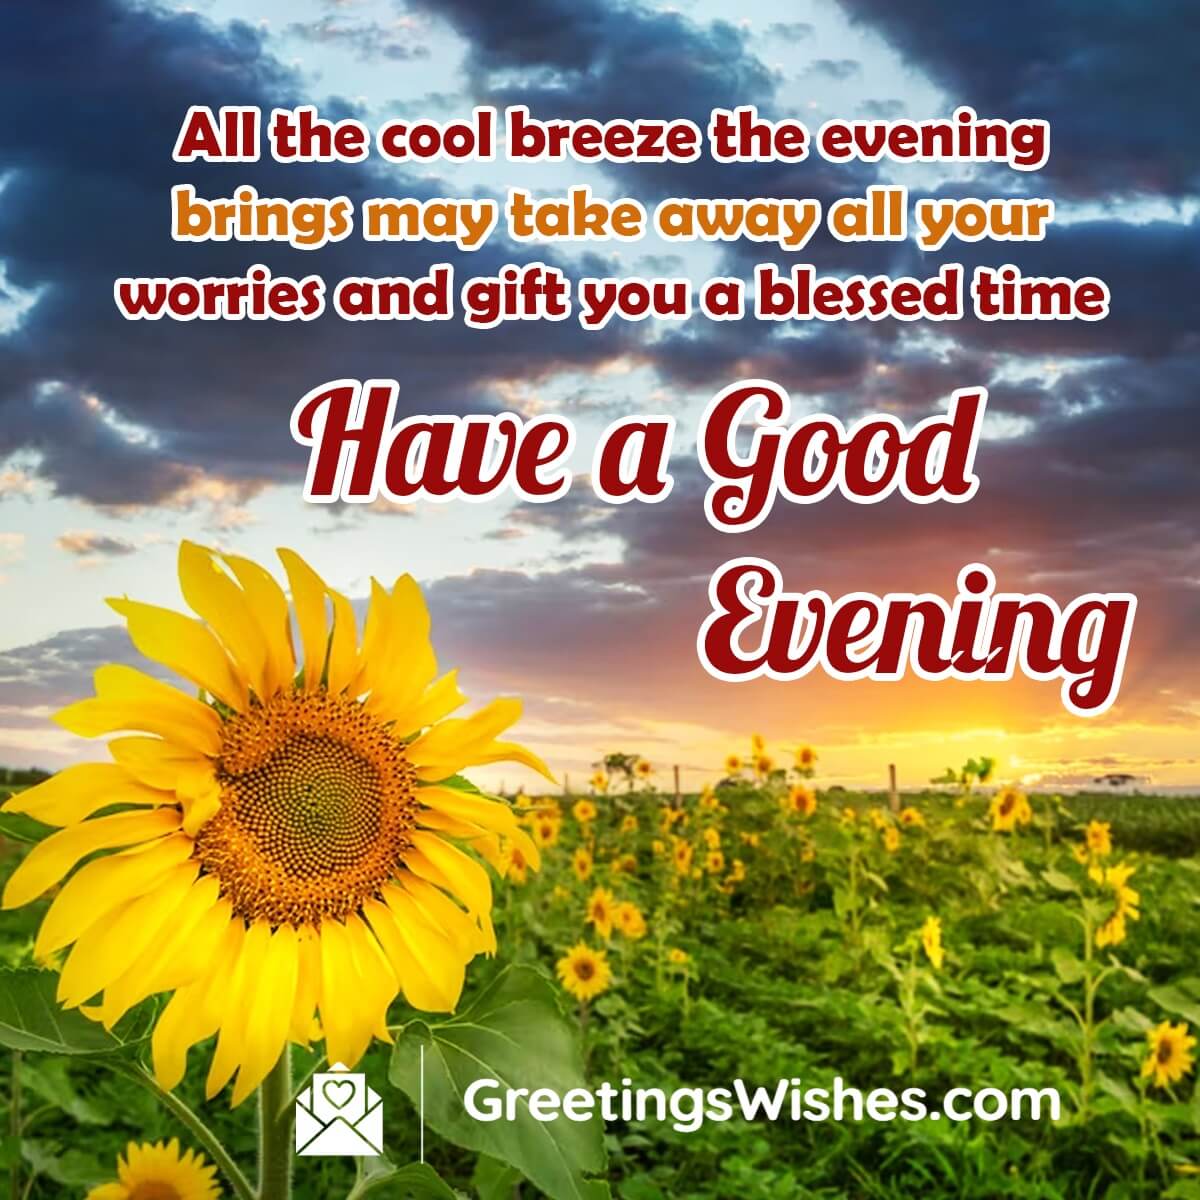 Good Evening Wishes - Greetings Wishes